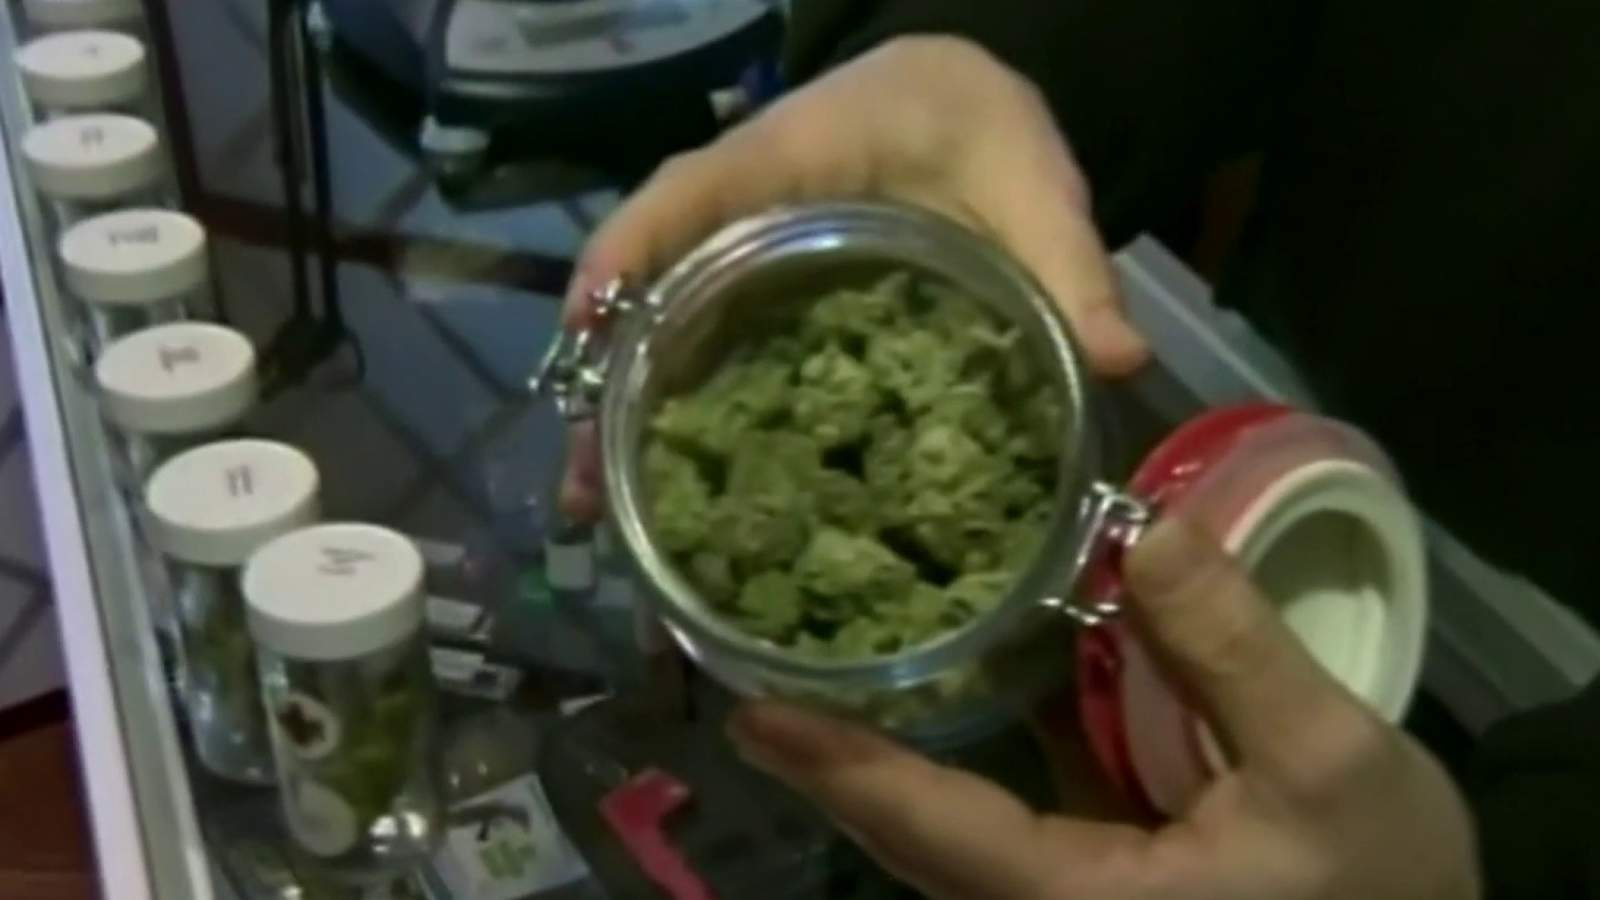 Detroit officials announce proposed ordinance allowing recreational marijuana sales in the city